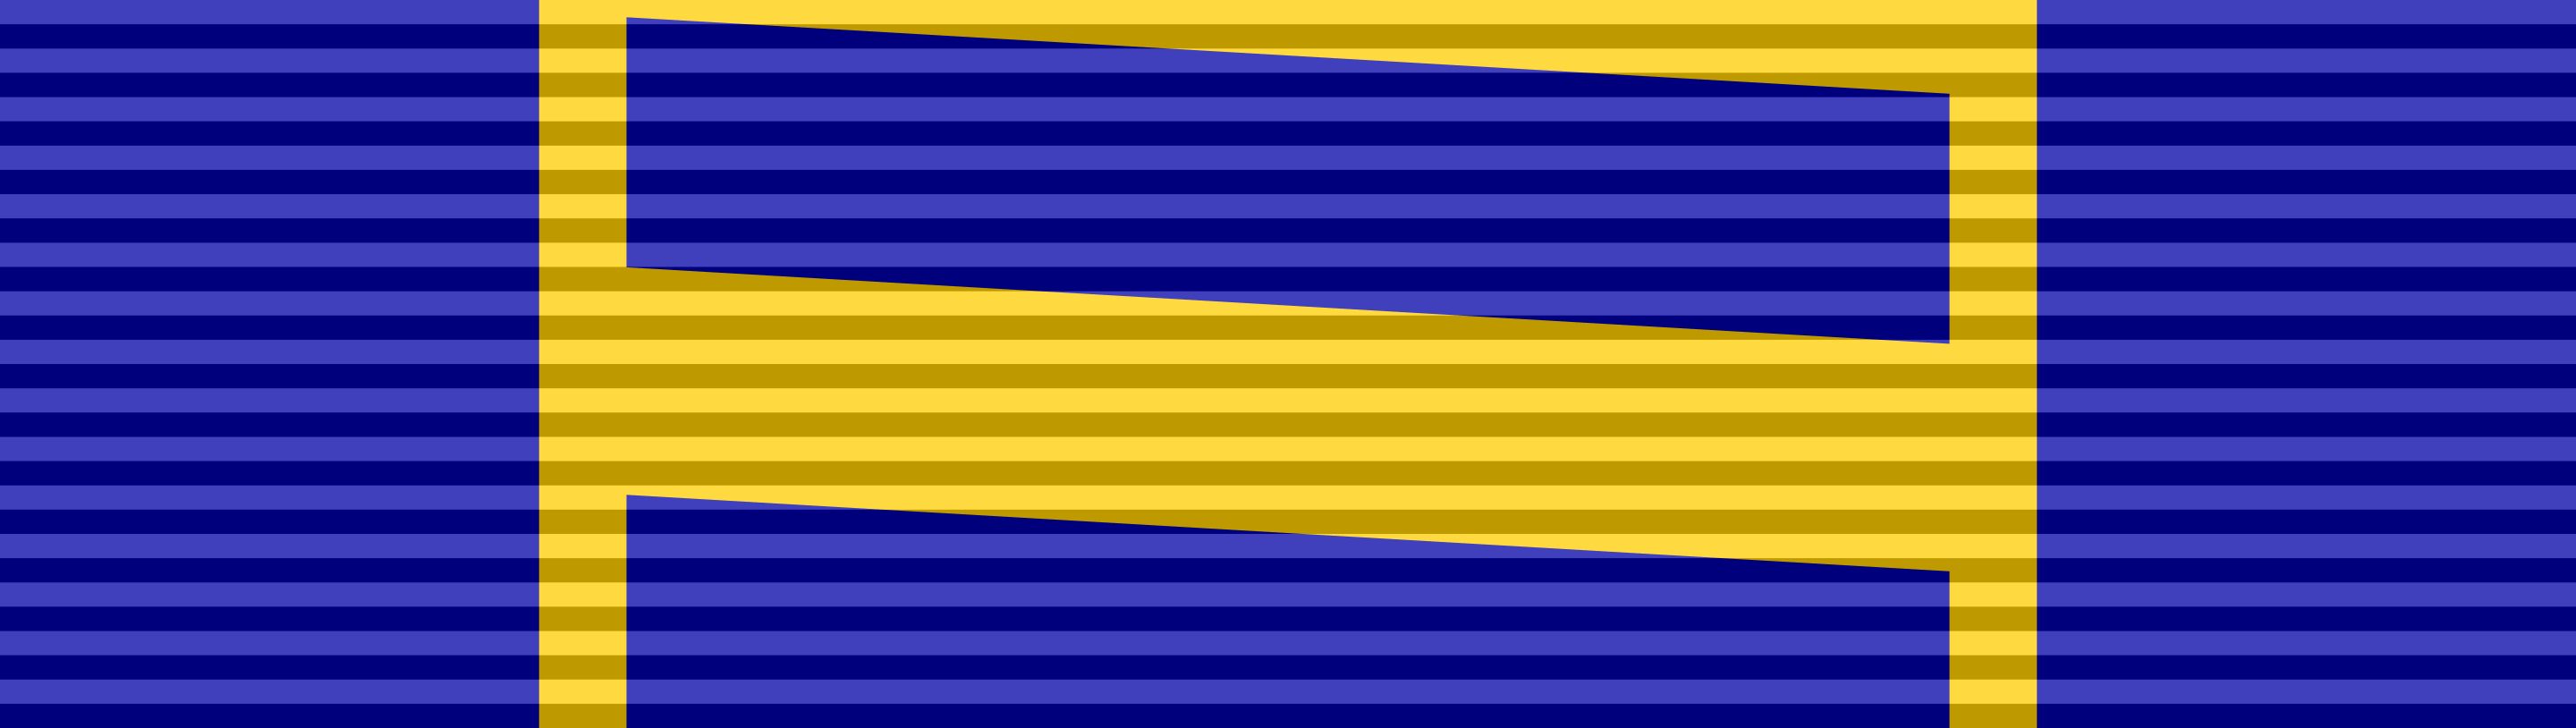 National Security Medal